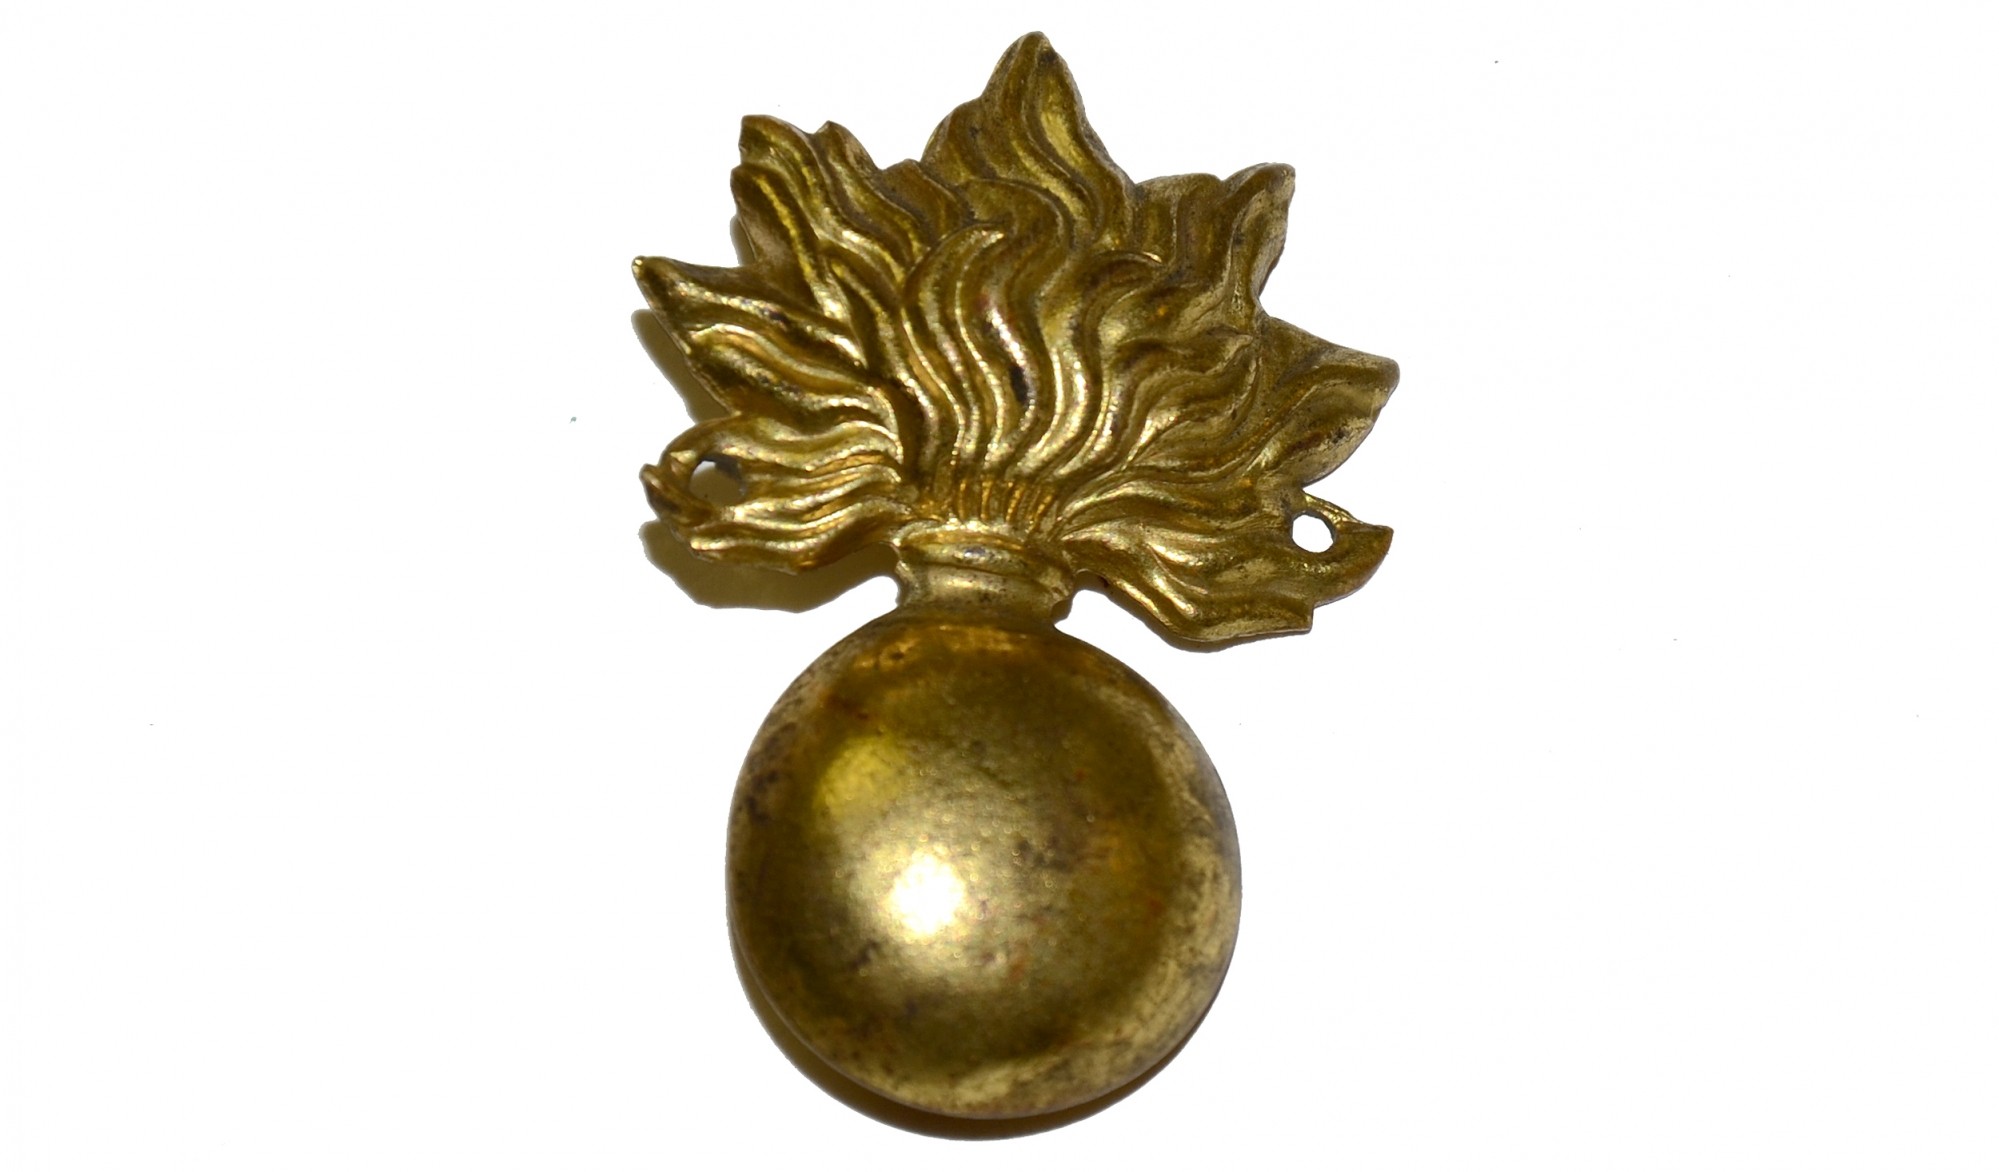 EXCELLENT, ORIGINAL ORDNANCE ‘FLAMING BOMB’ STAMPED BRASS INSIGNIA ...